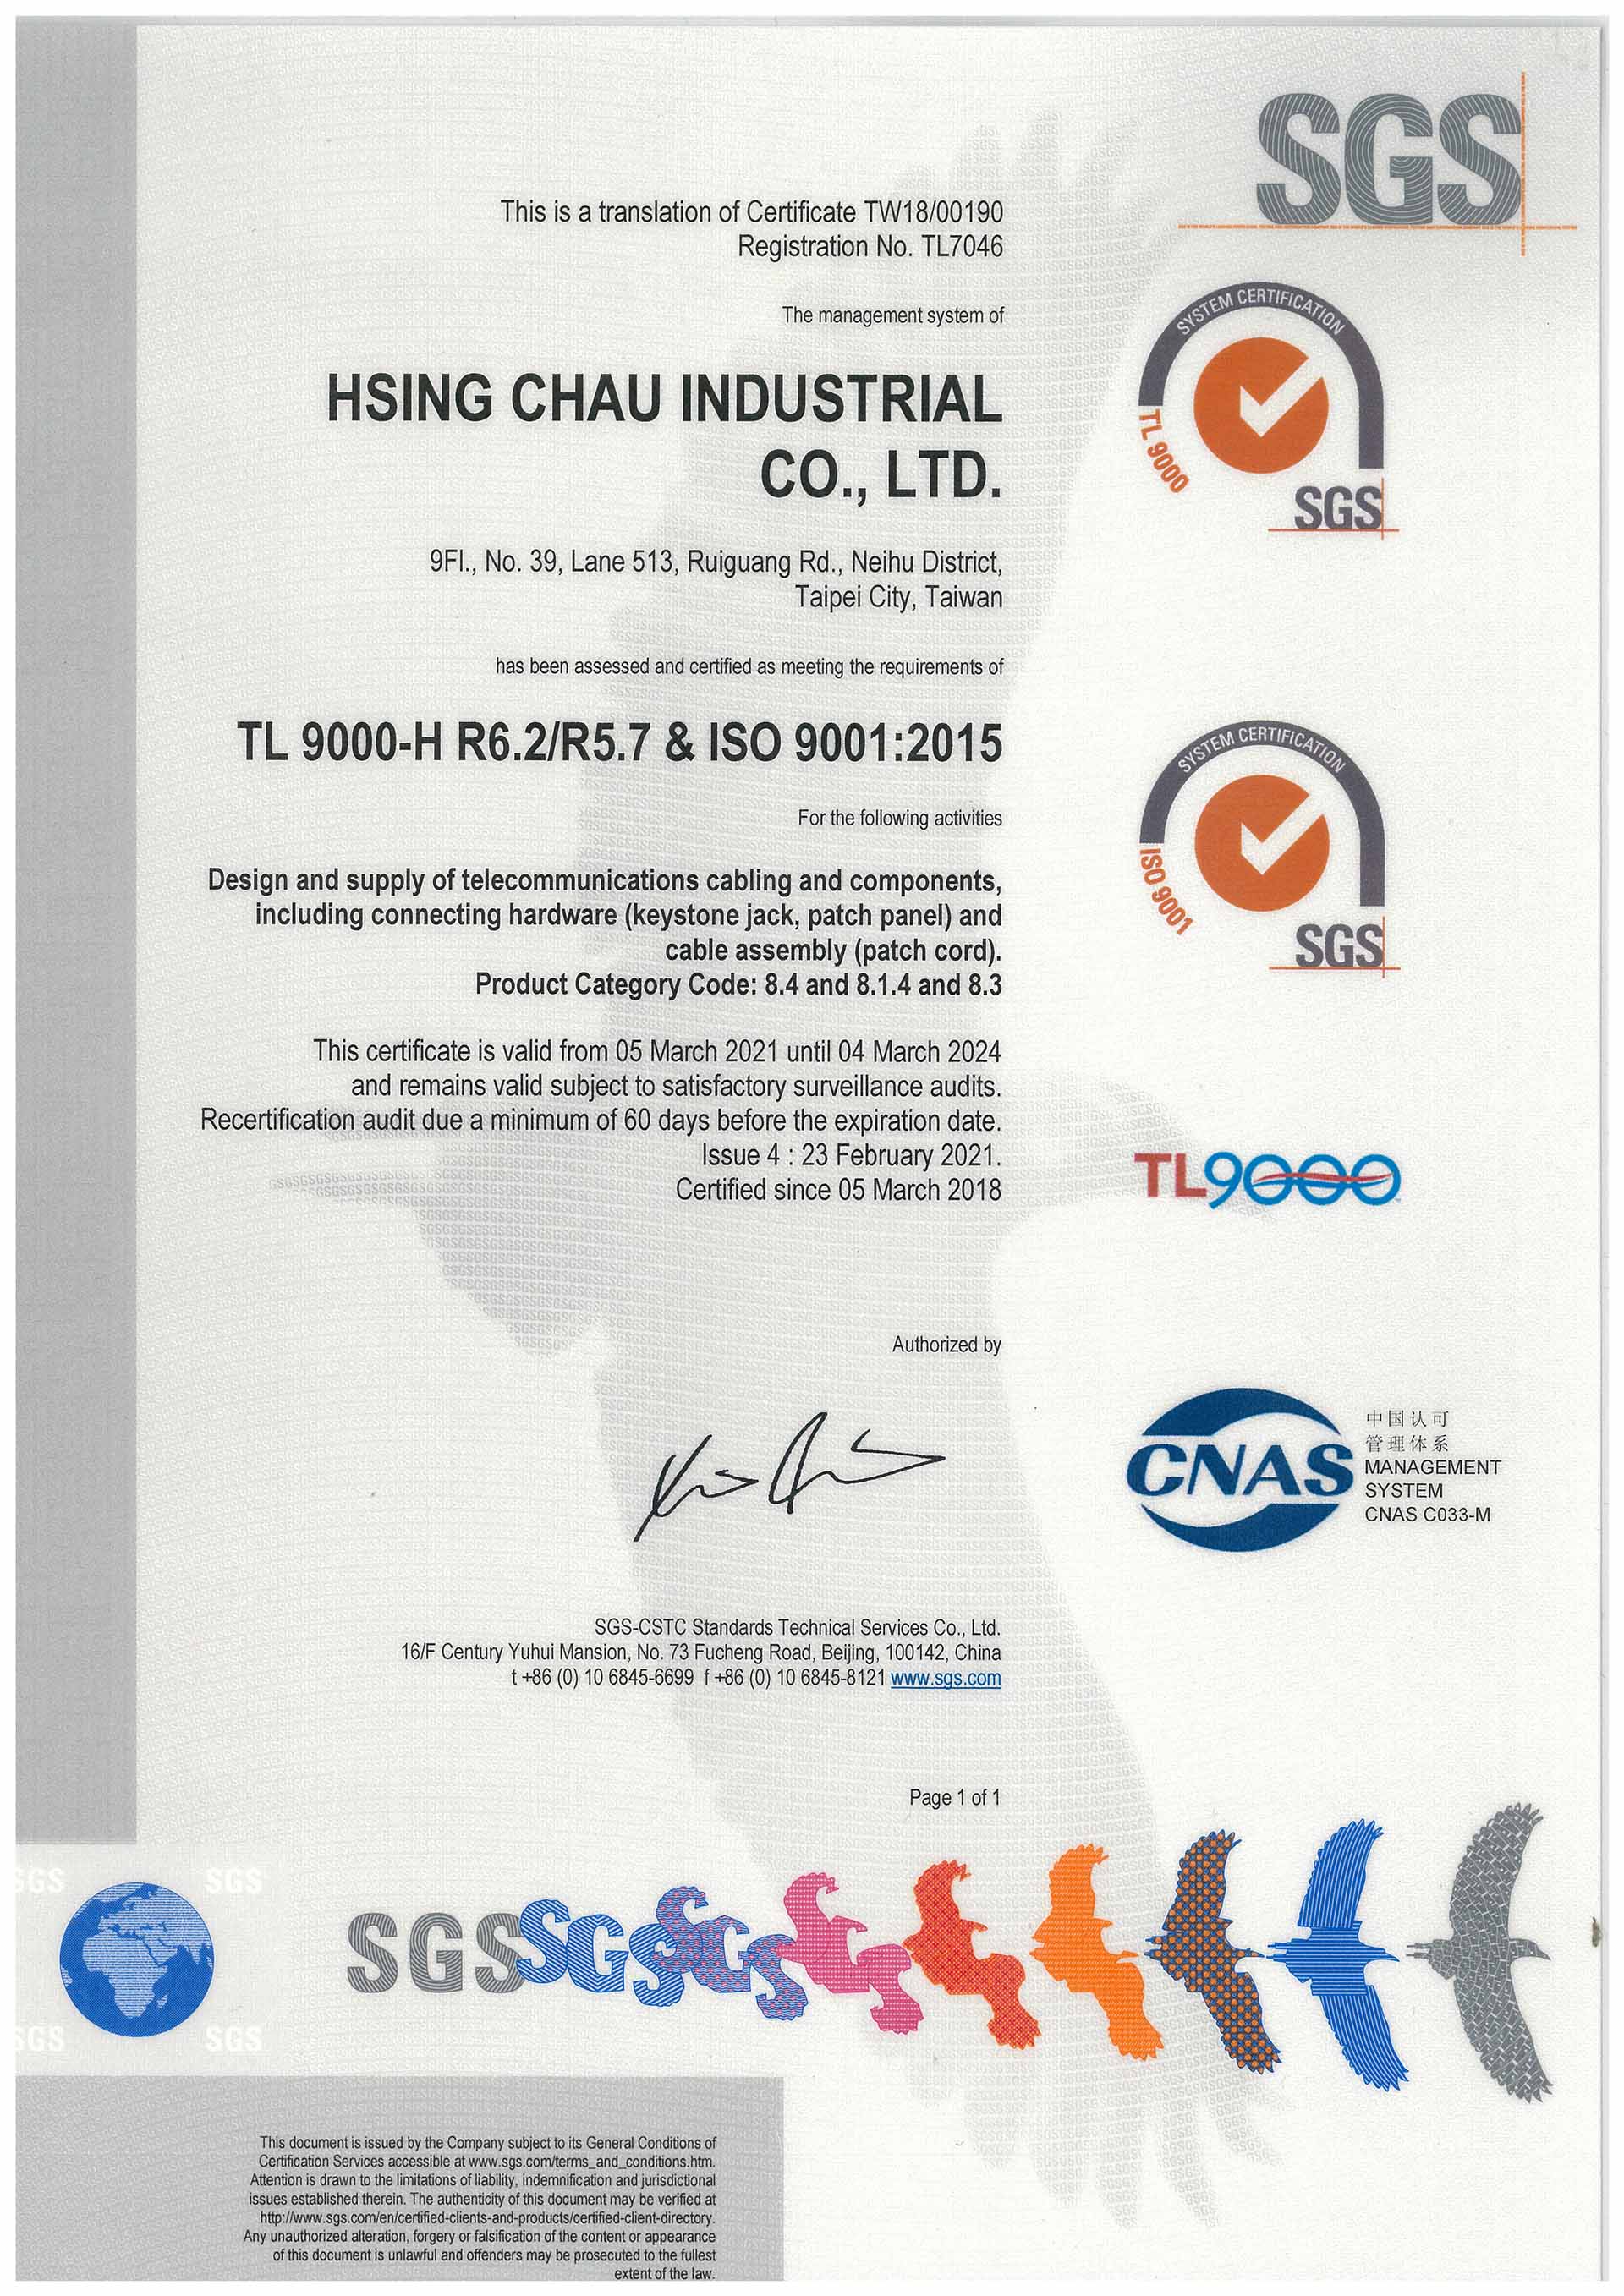 HCI achieves TL 9000 and ISO 9001:2015 Quality Management Certifications